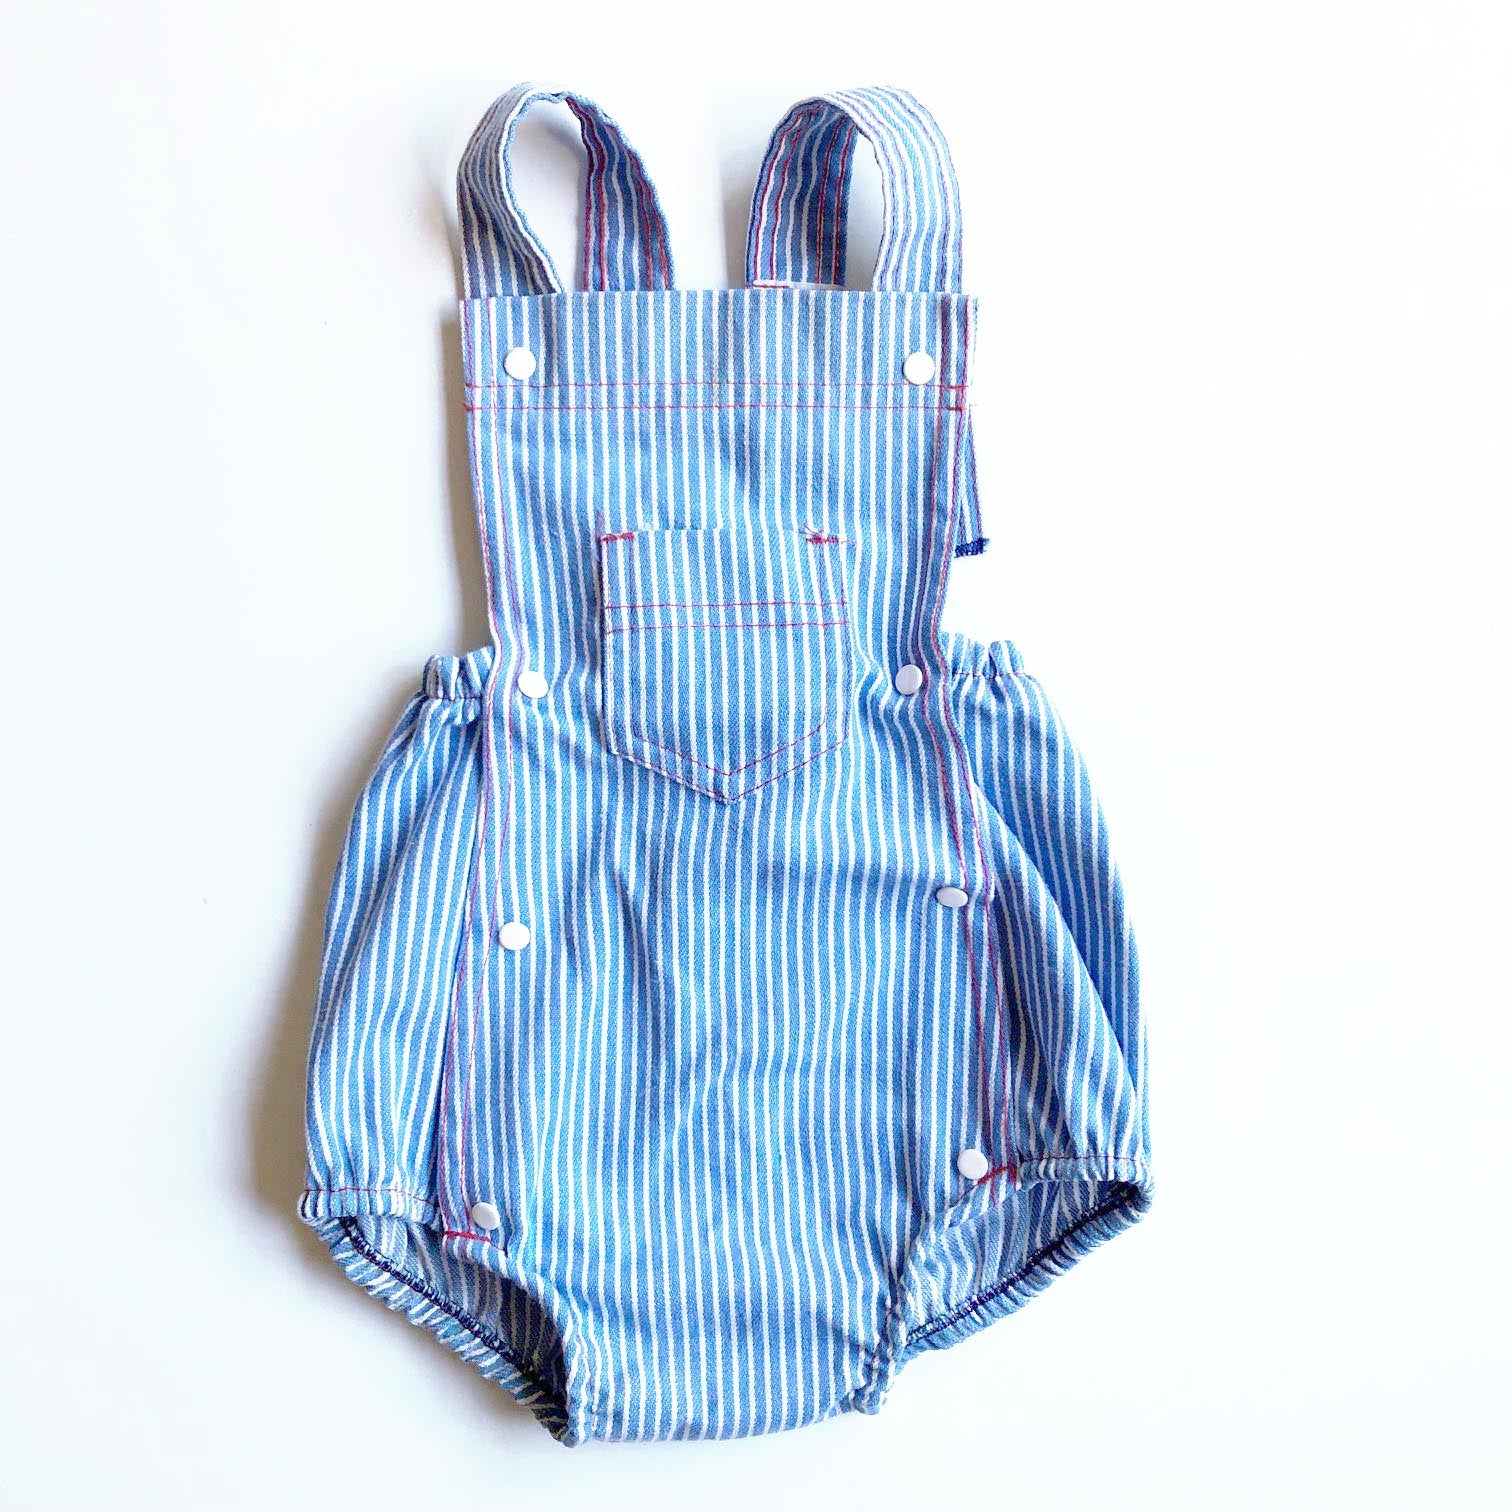 Hickory Stripe Baby Romper size 3-9 months